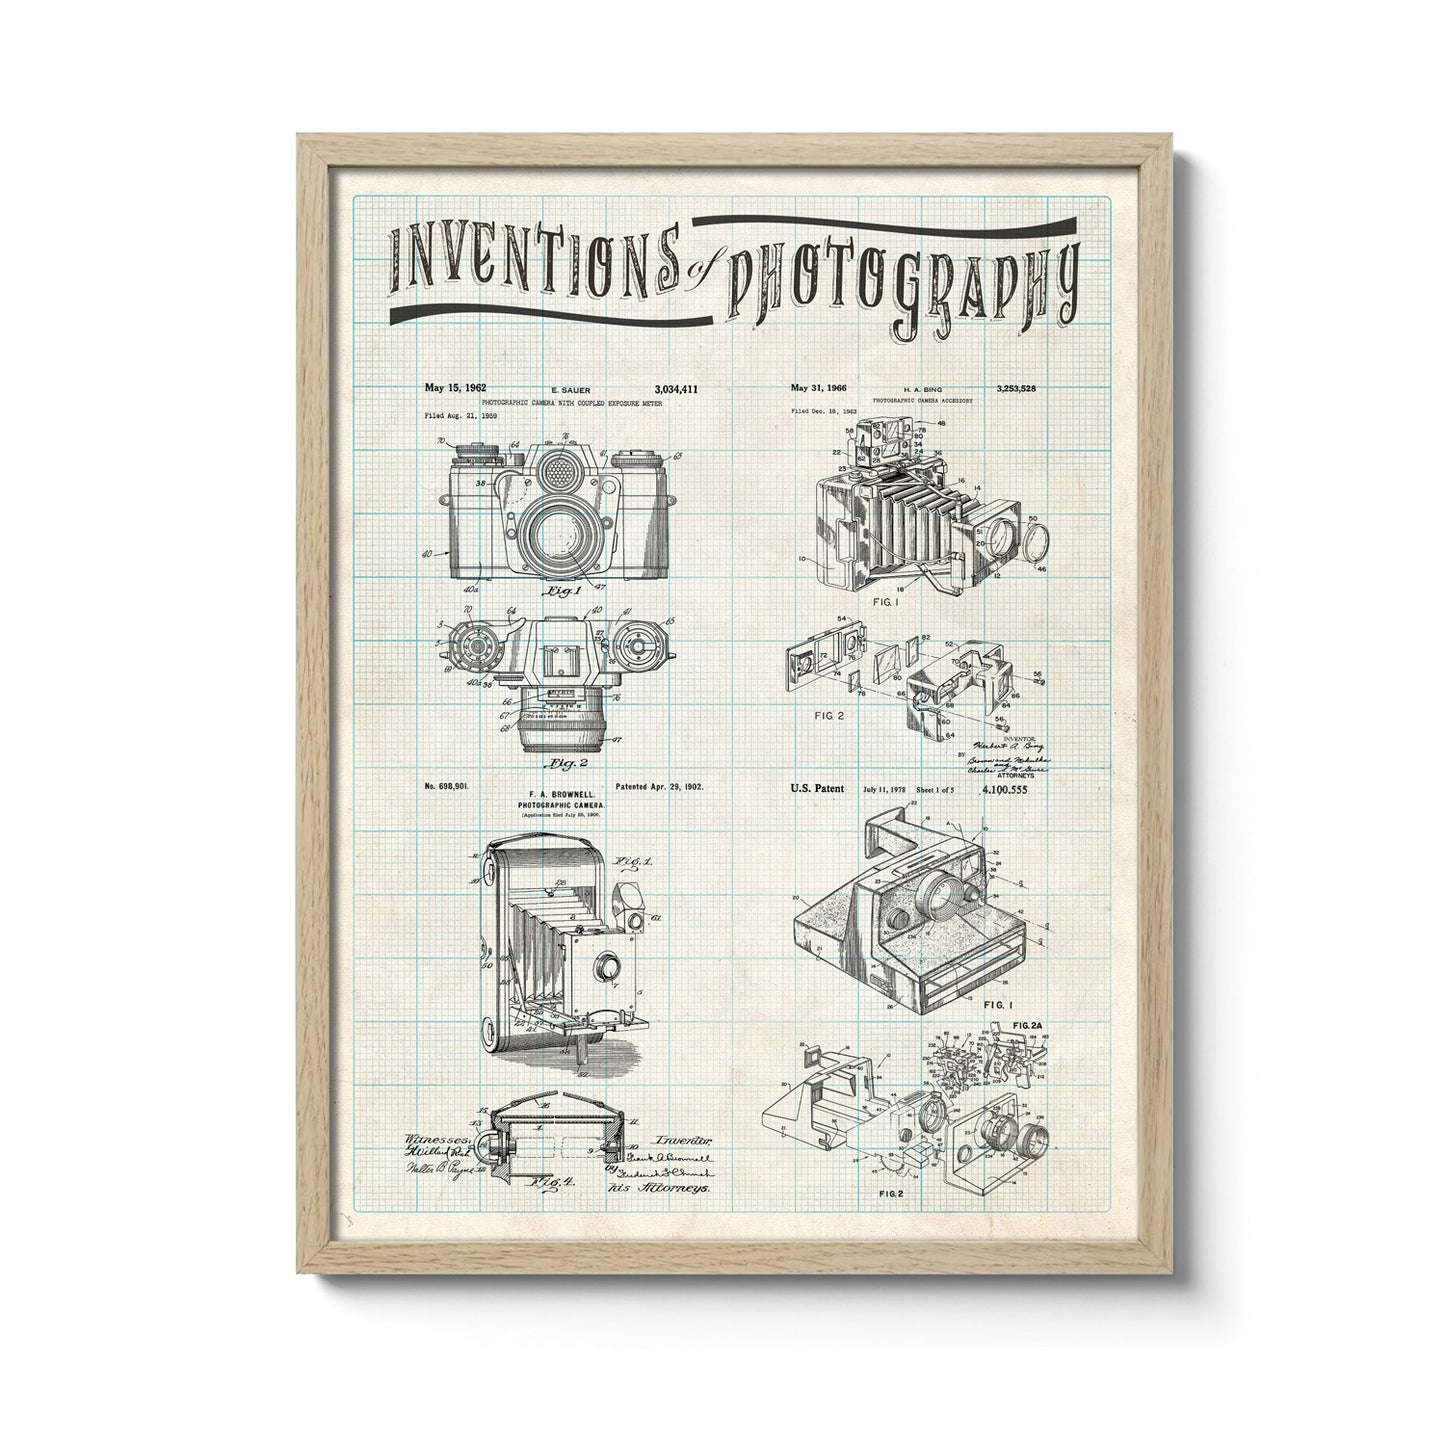 Affiche Inventions Photographie